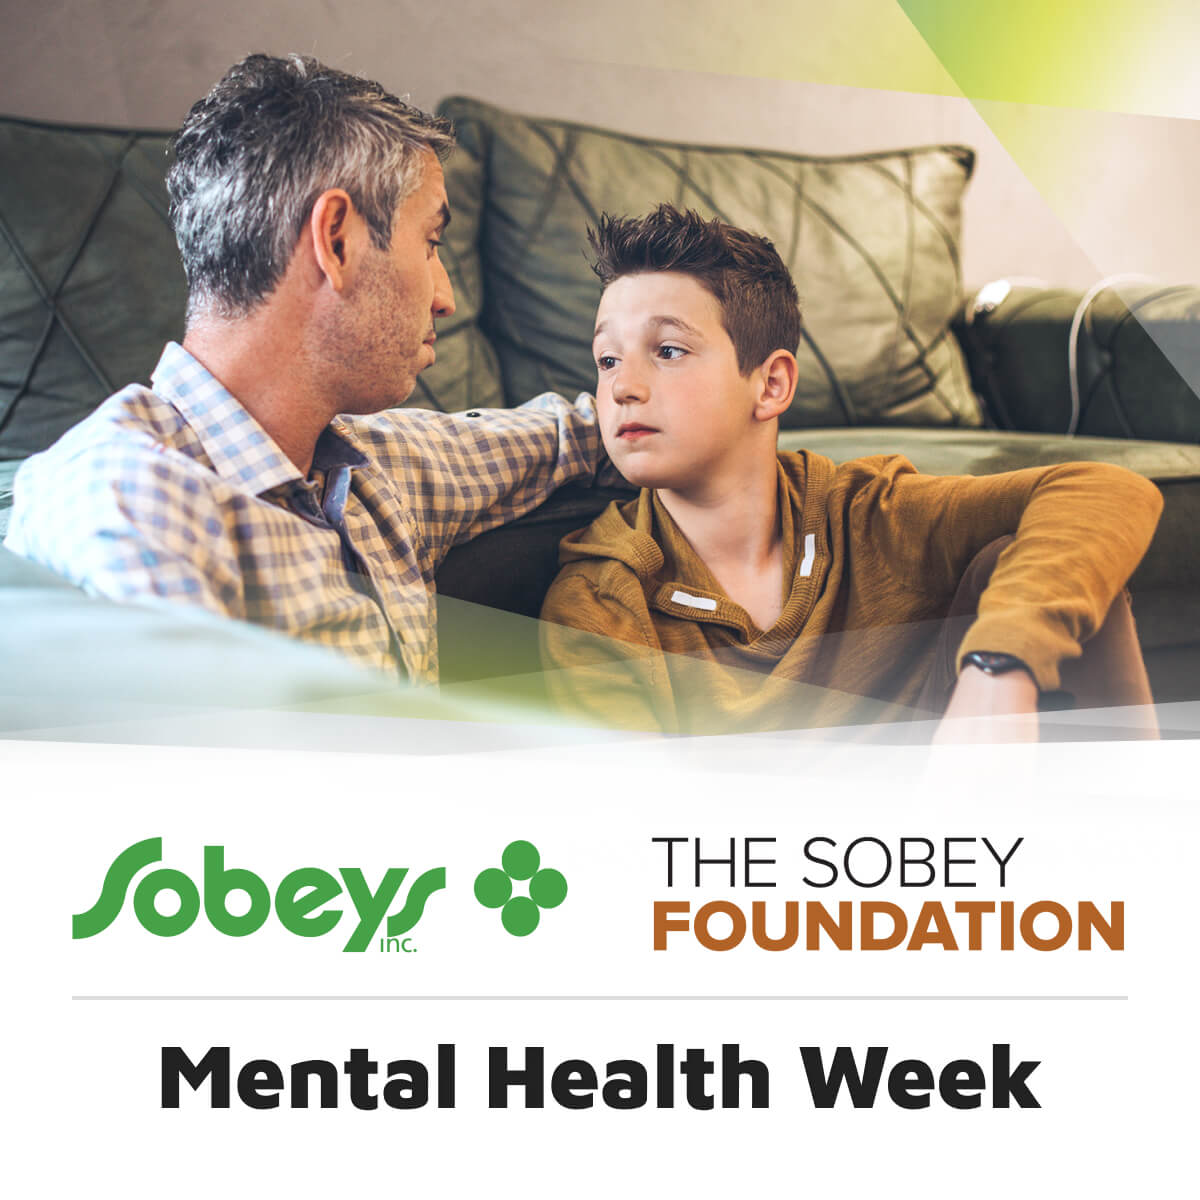 Kids tell us that the pandemic harmed their mental health. CCHF, @sobeys & the Sobey Foundation partnered in the Family of Support Child & Youth Mental Health Initiative to fund mental health programs at 13 Canadian children’s hospitals. Together, we will be an engine for change